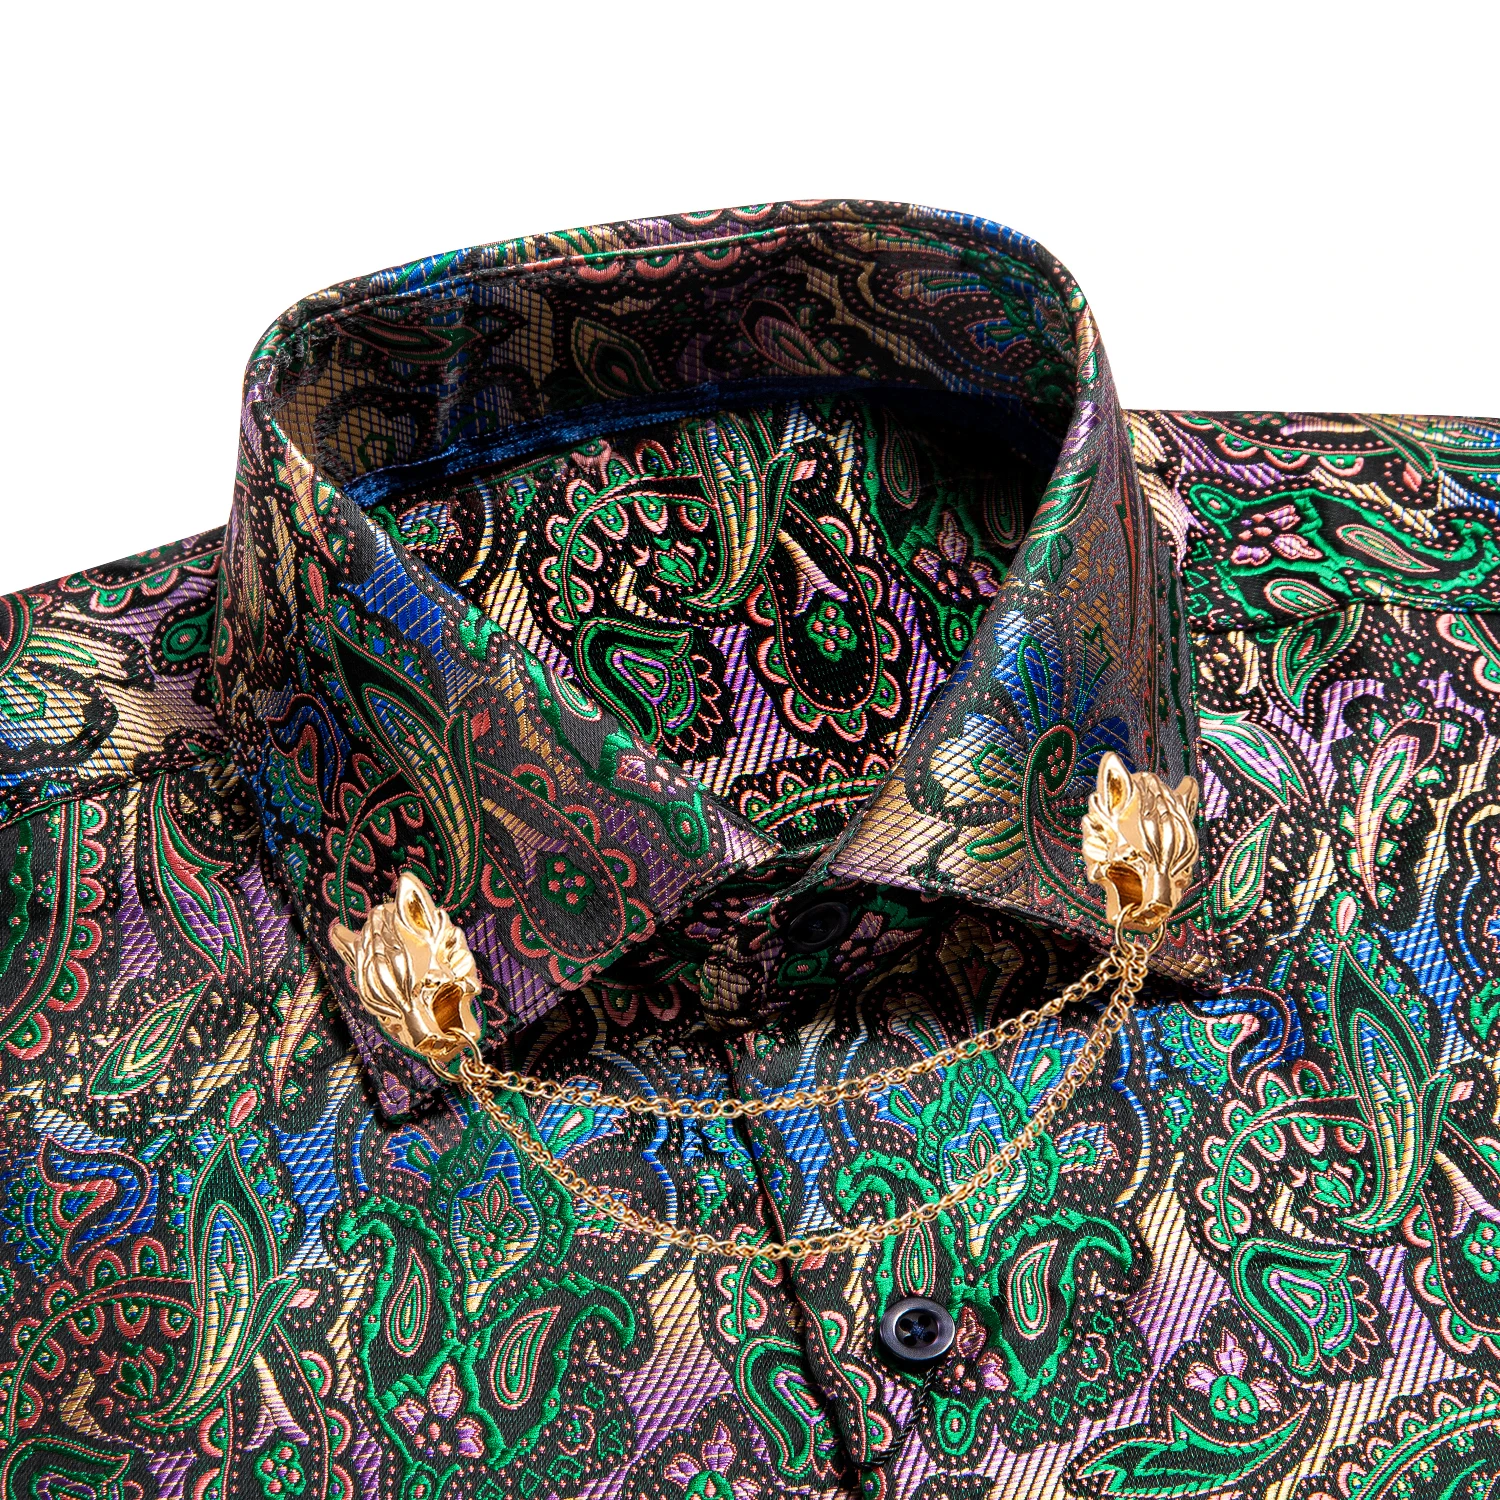 Novelty Men Silk Shirt Teal Green Purple Brown Long Sleeve Slim Fit Paisley Jacquard Shirt For Male Business Party Gifts Hi-Tie barry wang luxury silk mens scarf floral paisley stylish burgundy gold black navy blue purple for male wedding business party